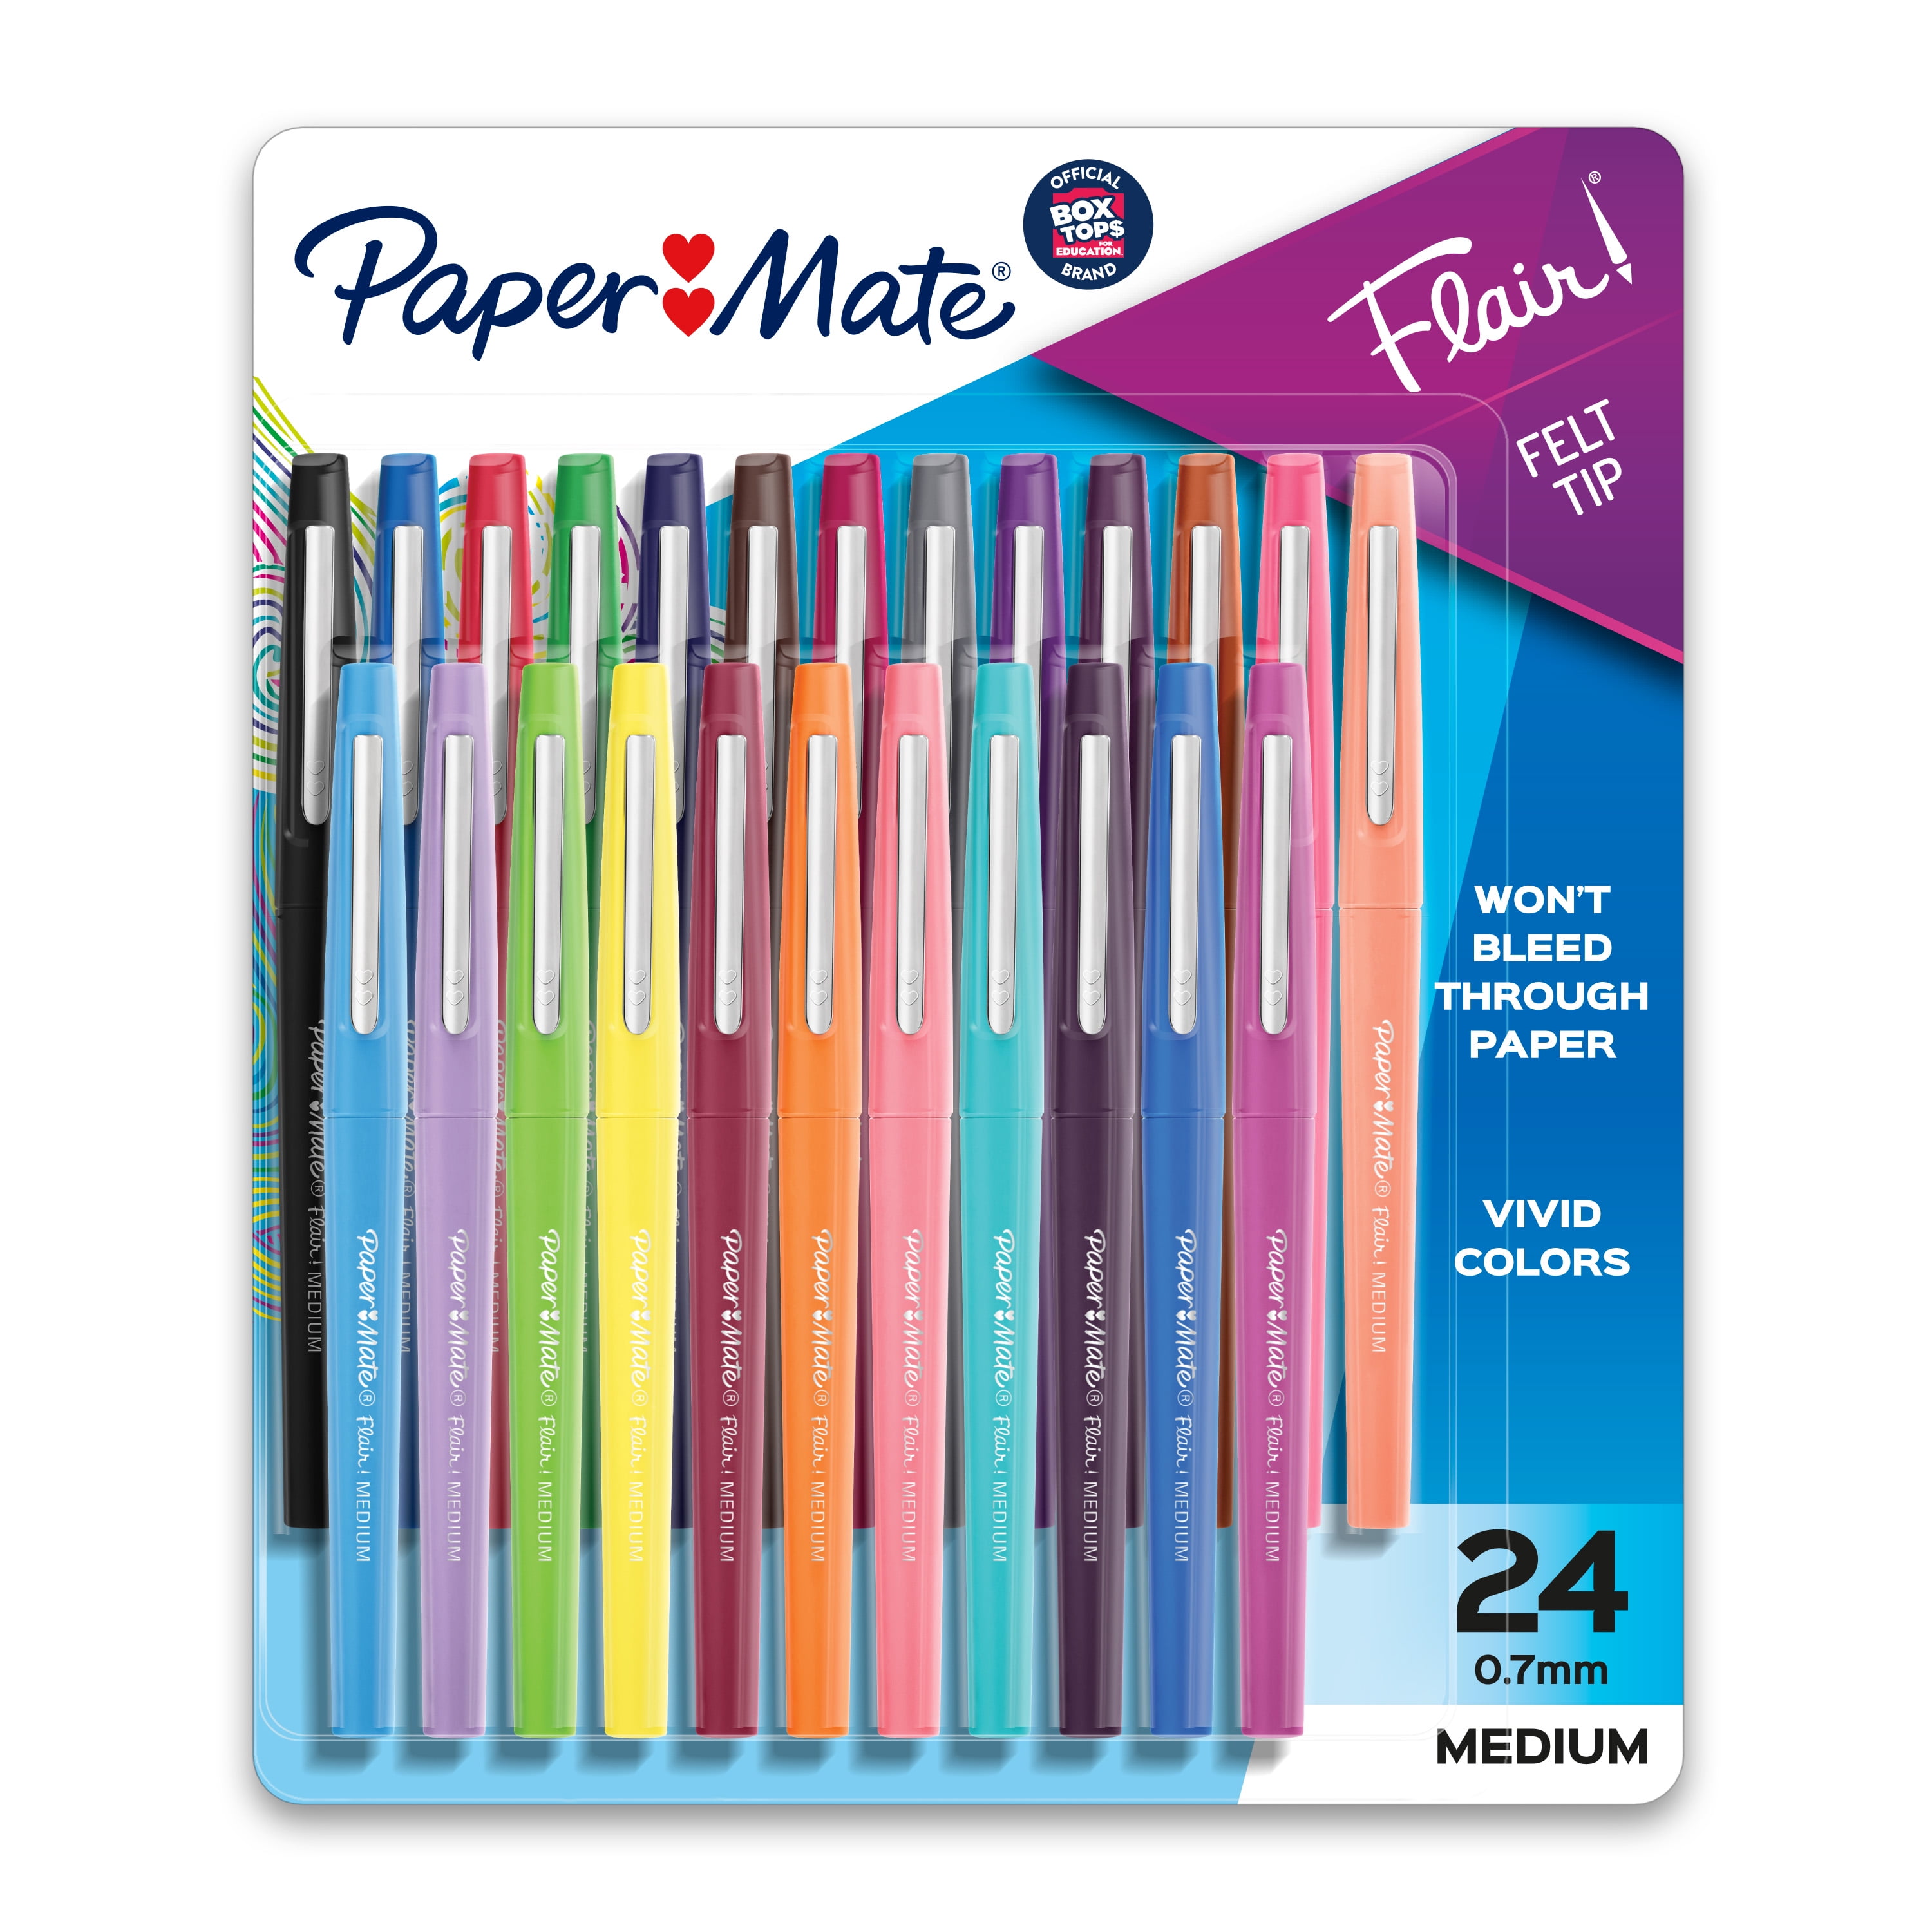 The Best Multicolor Pen in One (12 & 24 Pack)